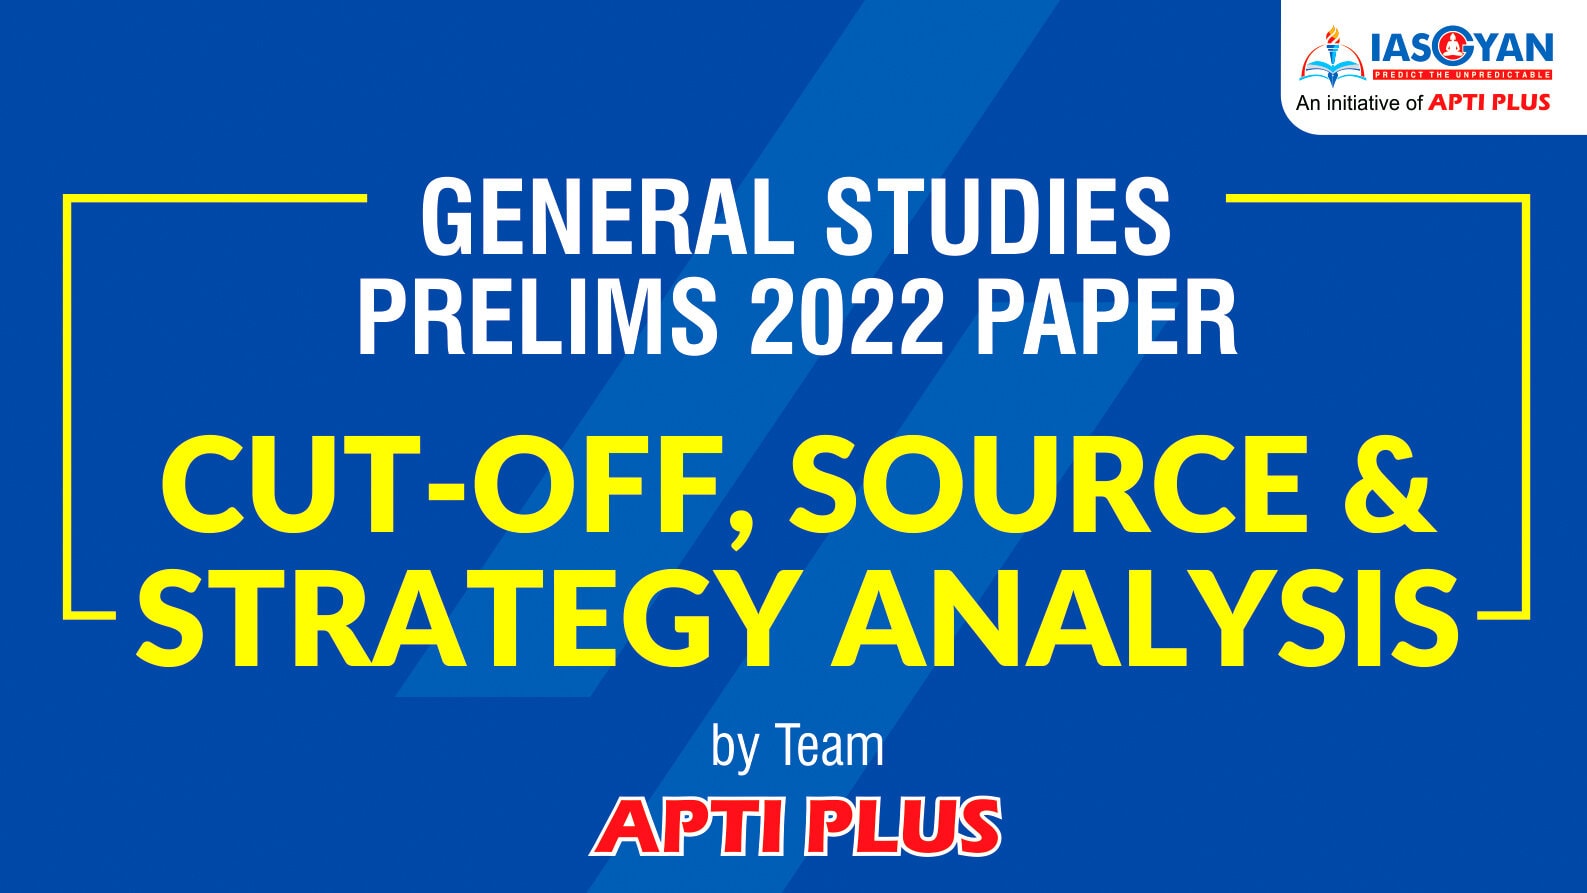 CUT-OFF/SOURCE/STRATEGY/ANALYSIS: GENERAL STUDIES PRELIMS 2022 PAPER-by Team Apti Plus